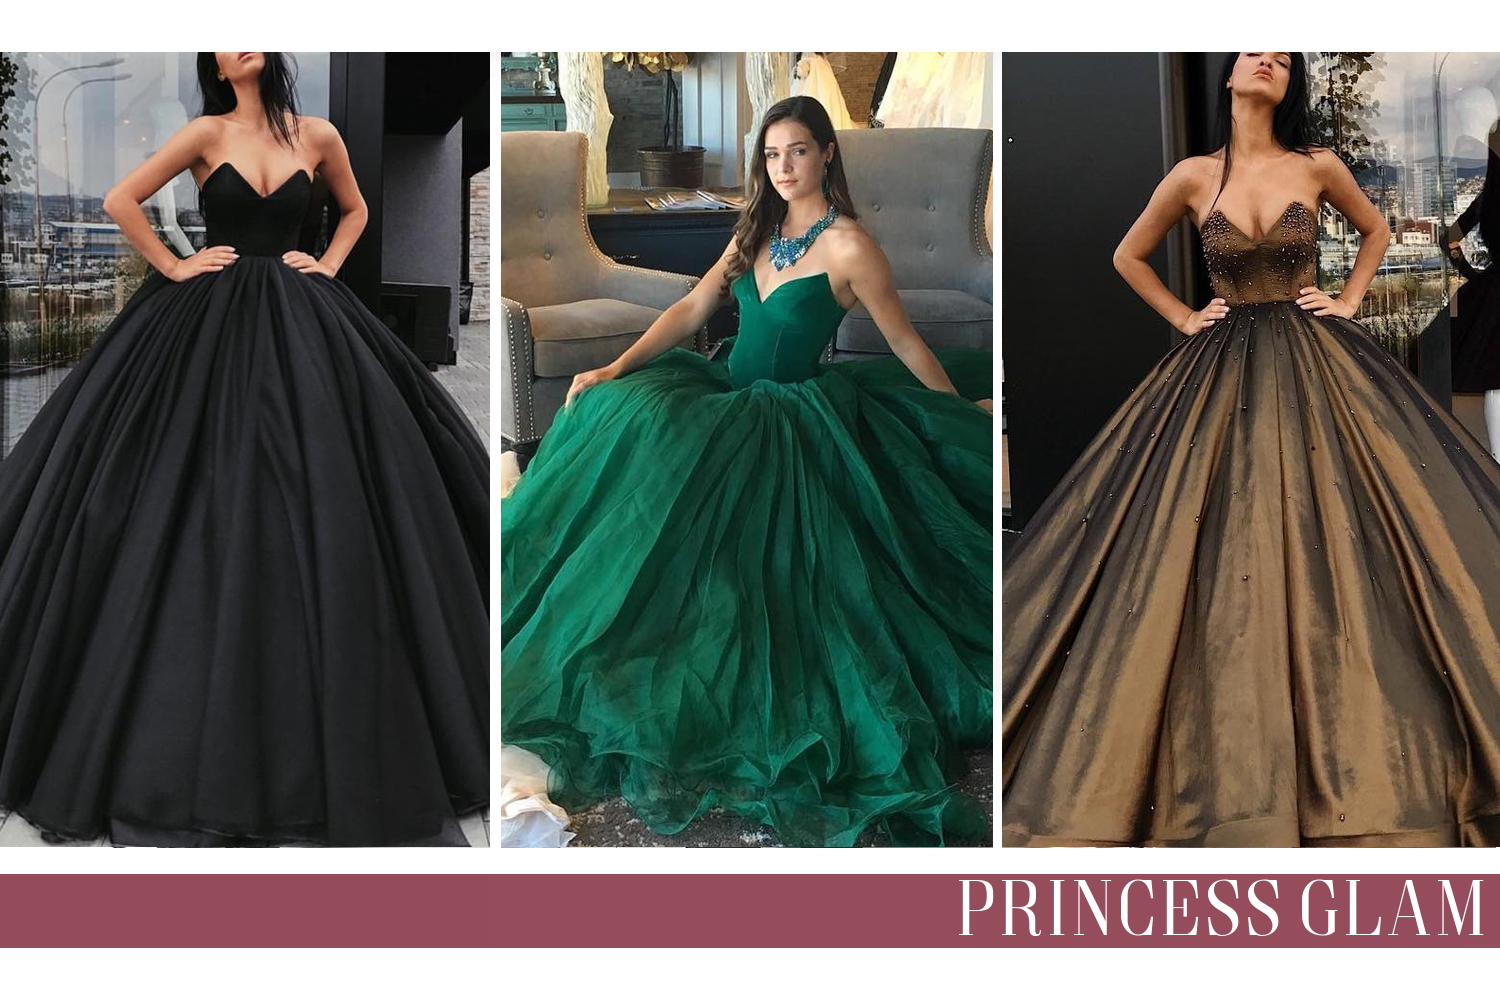 fashion collage with three princess glam gowns for prom